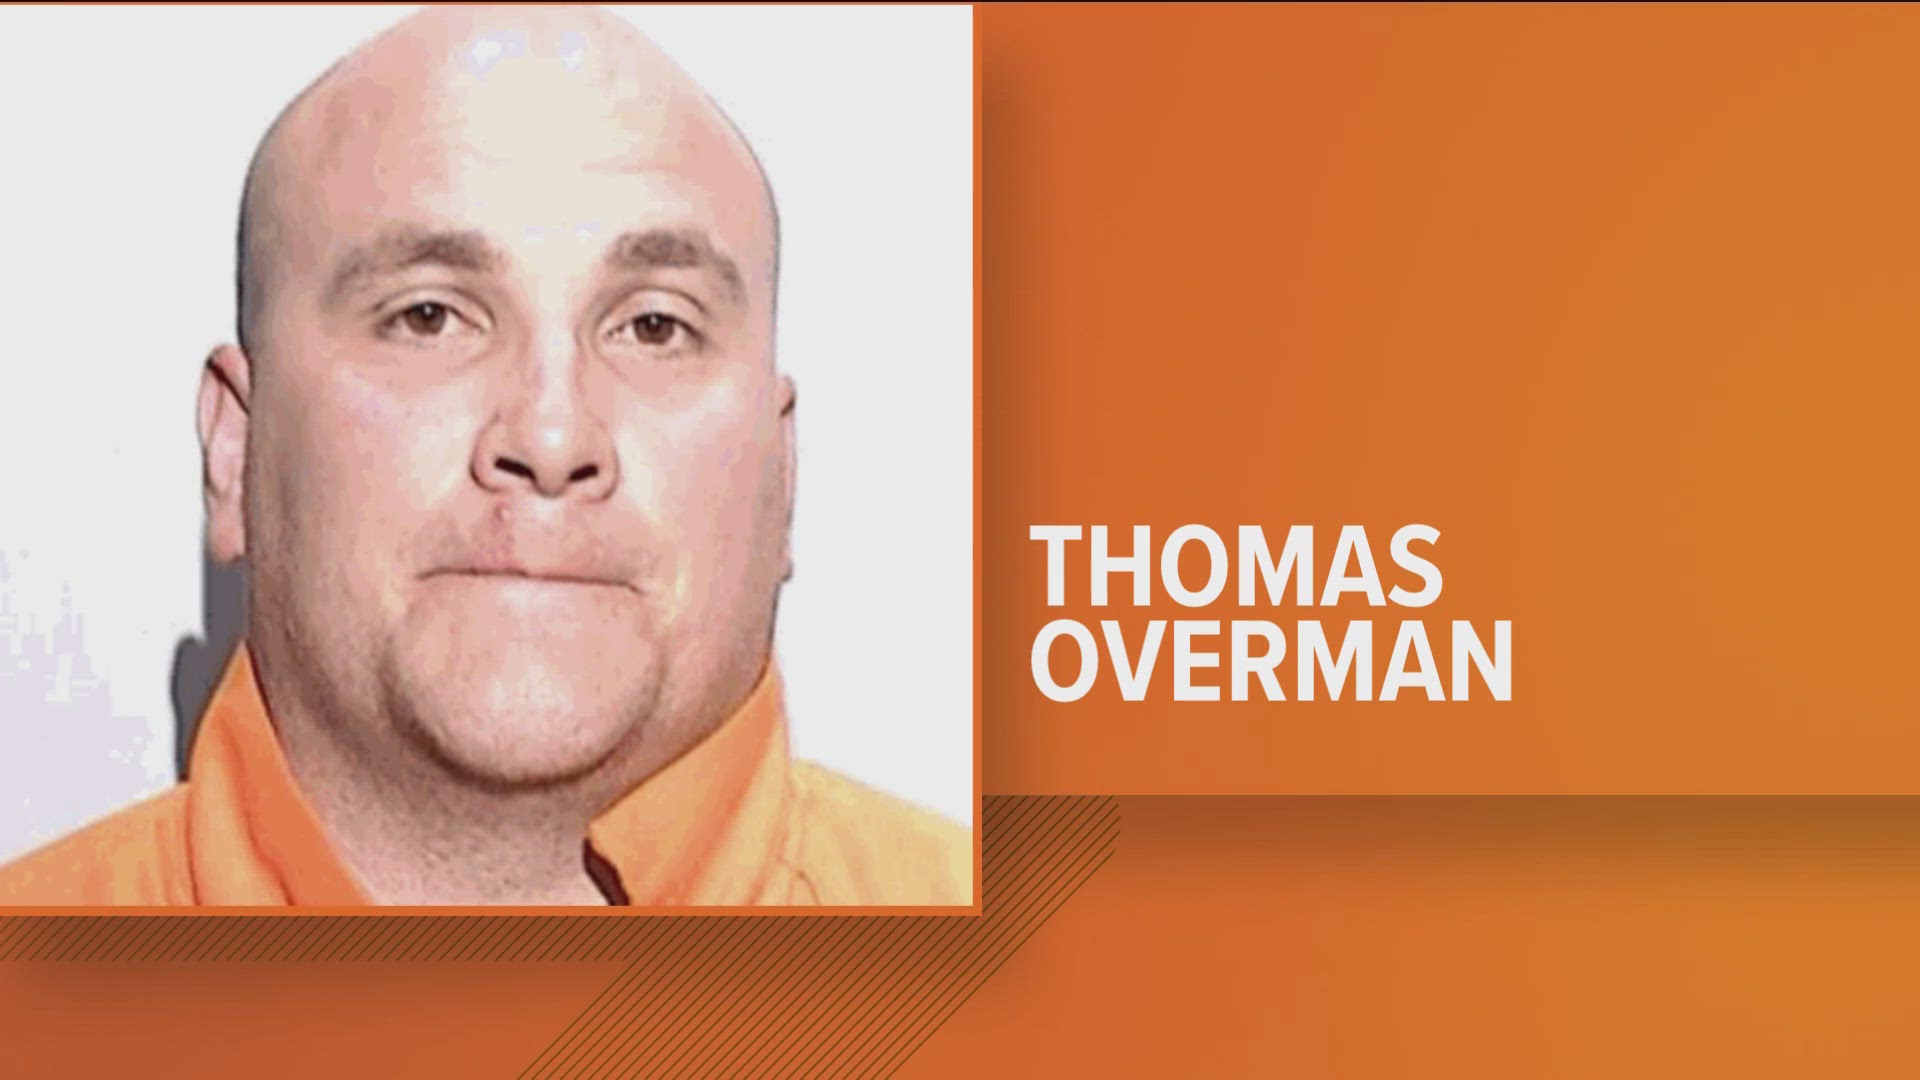 Police said Officer Thomas Overman allegedly assaulted an adult family member at a residence in east Toledo.